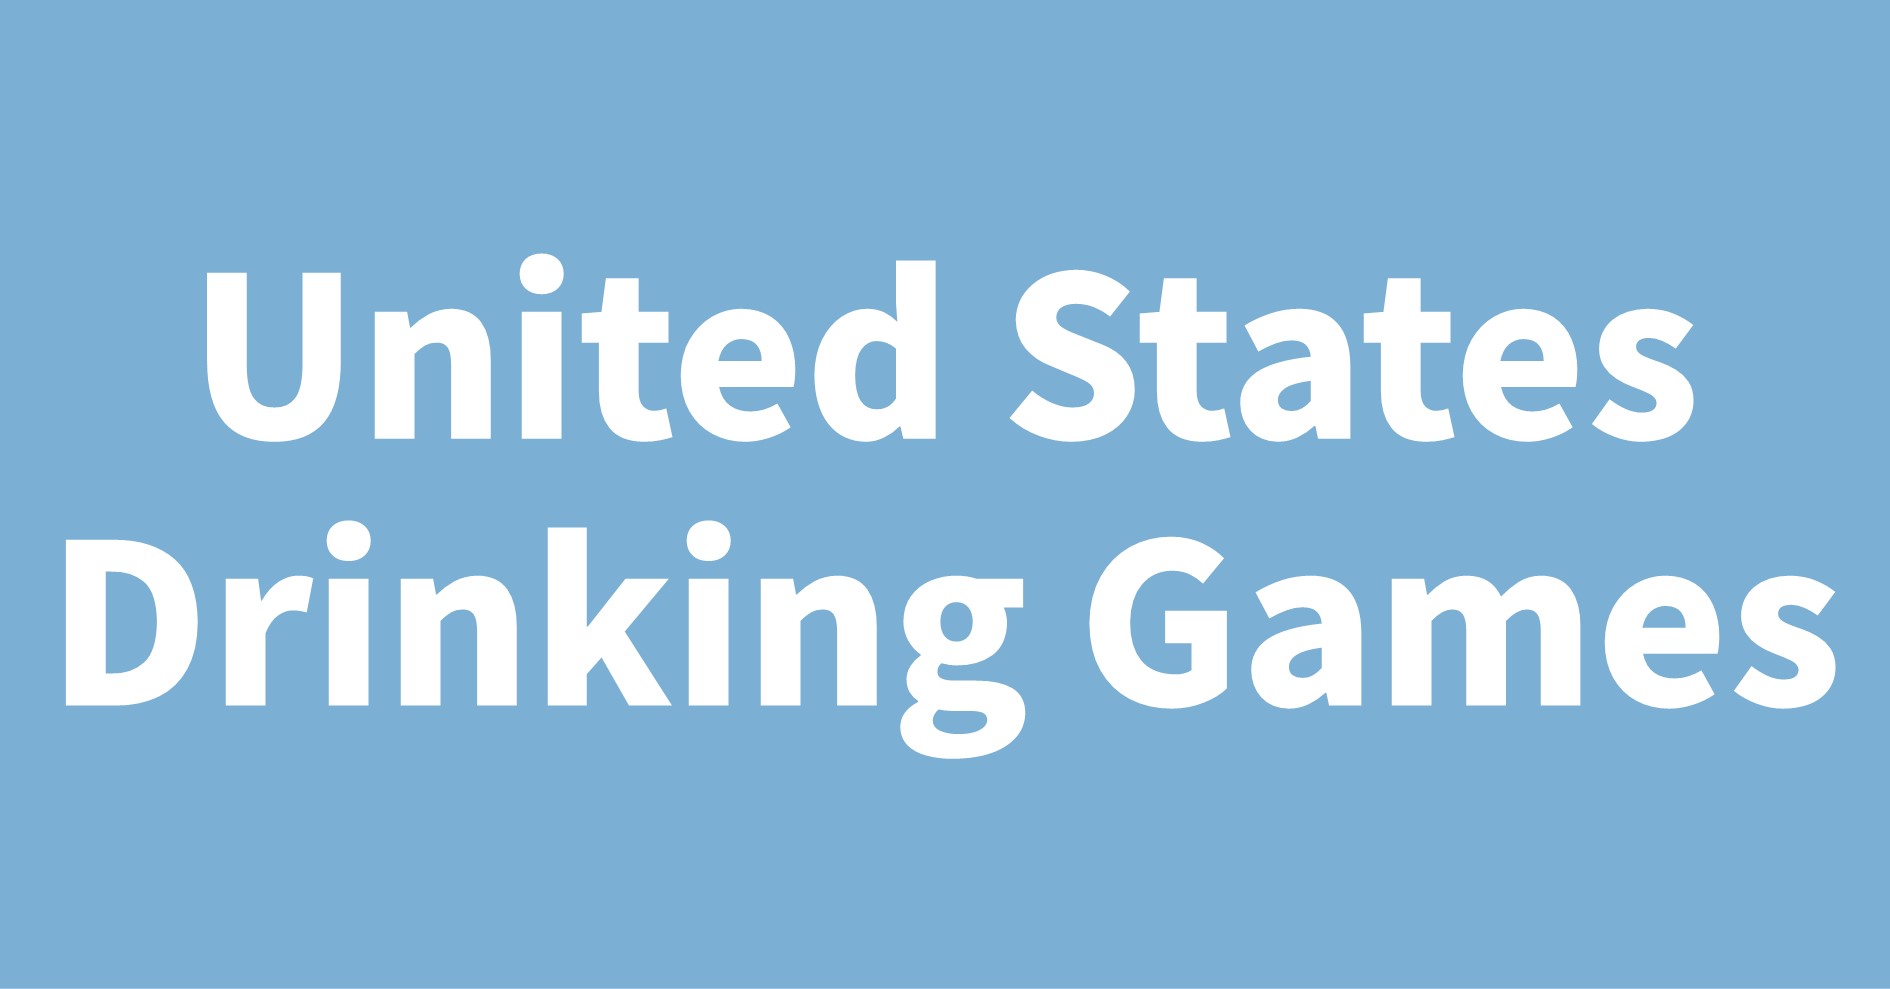 United States Drinking Games